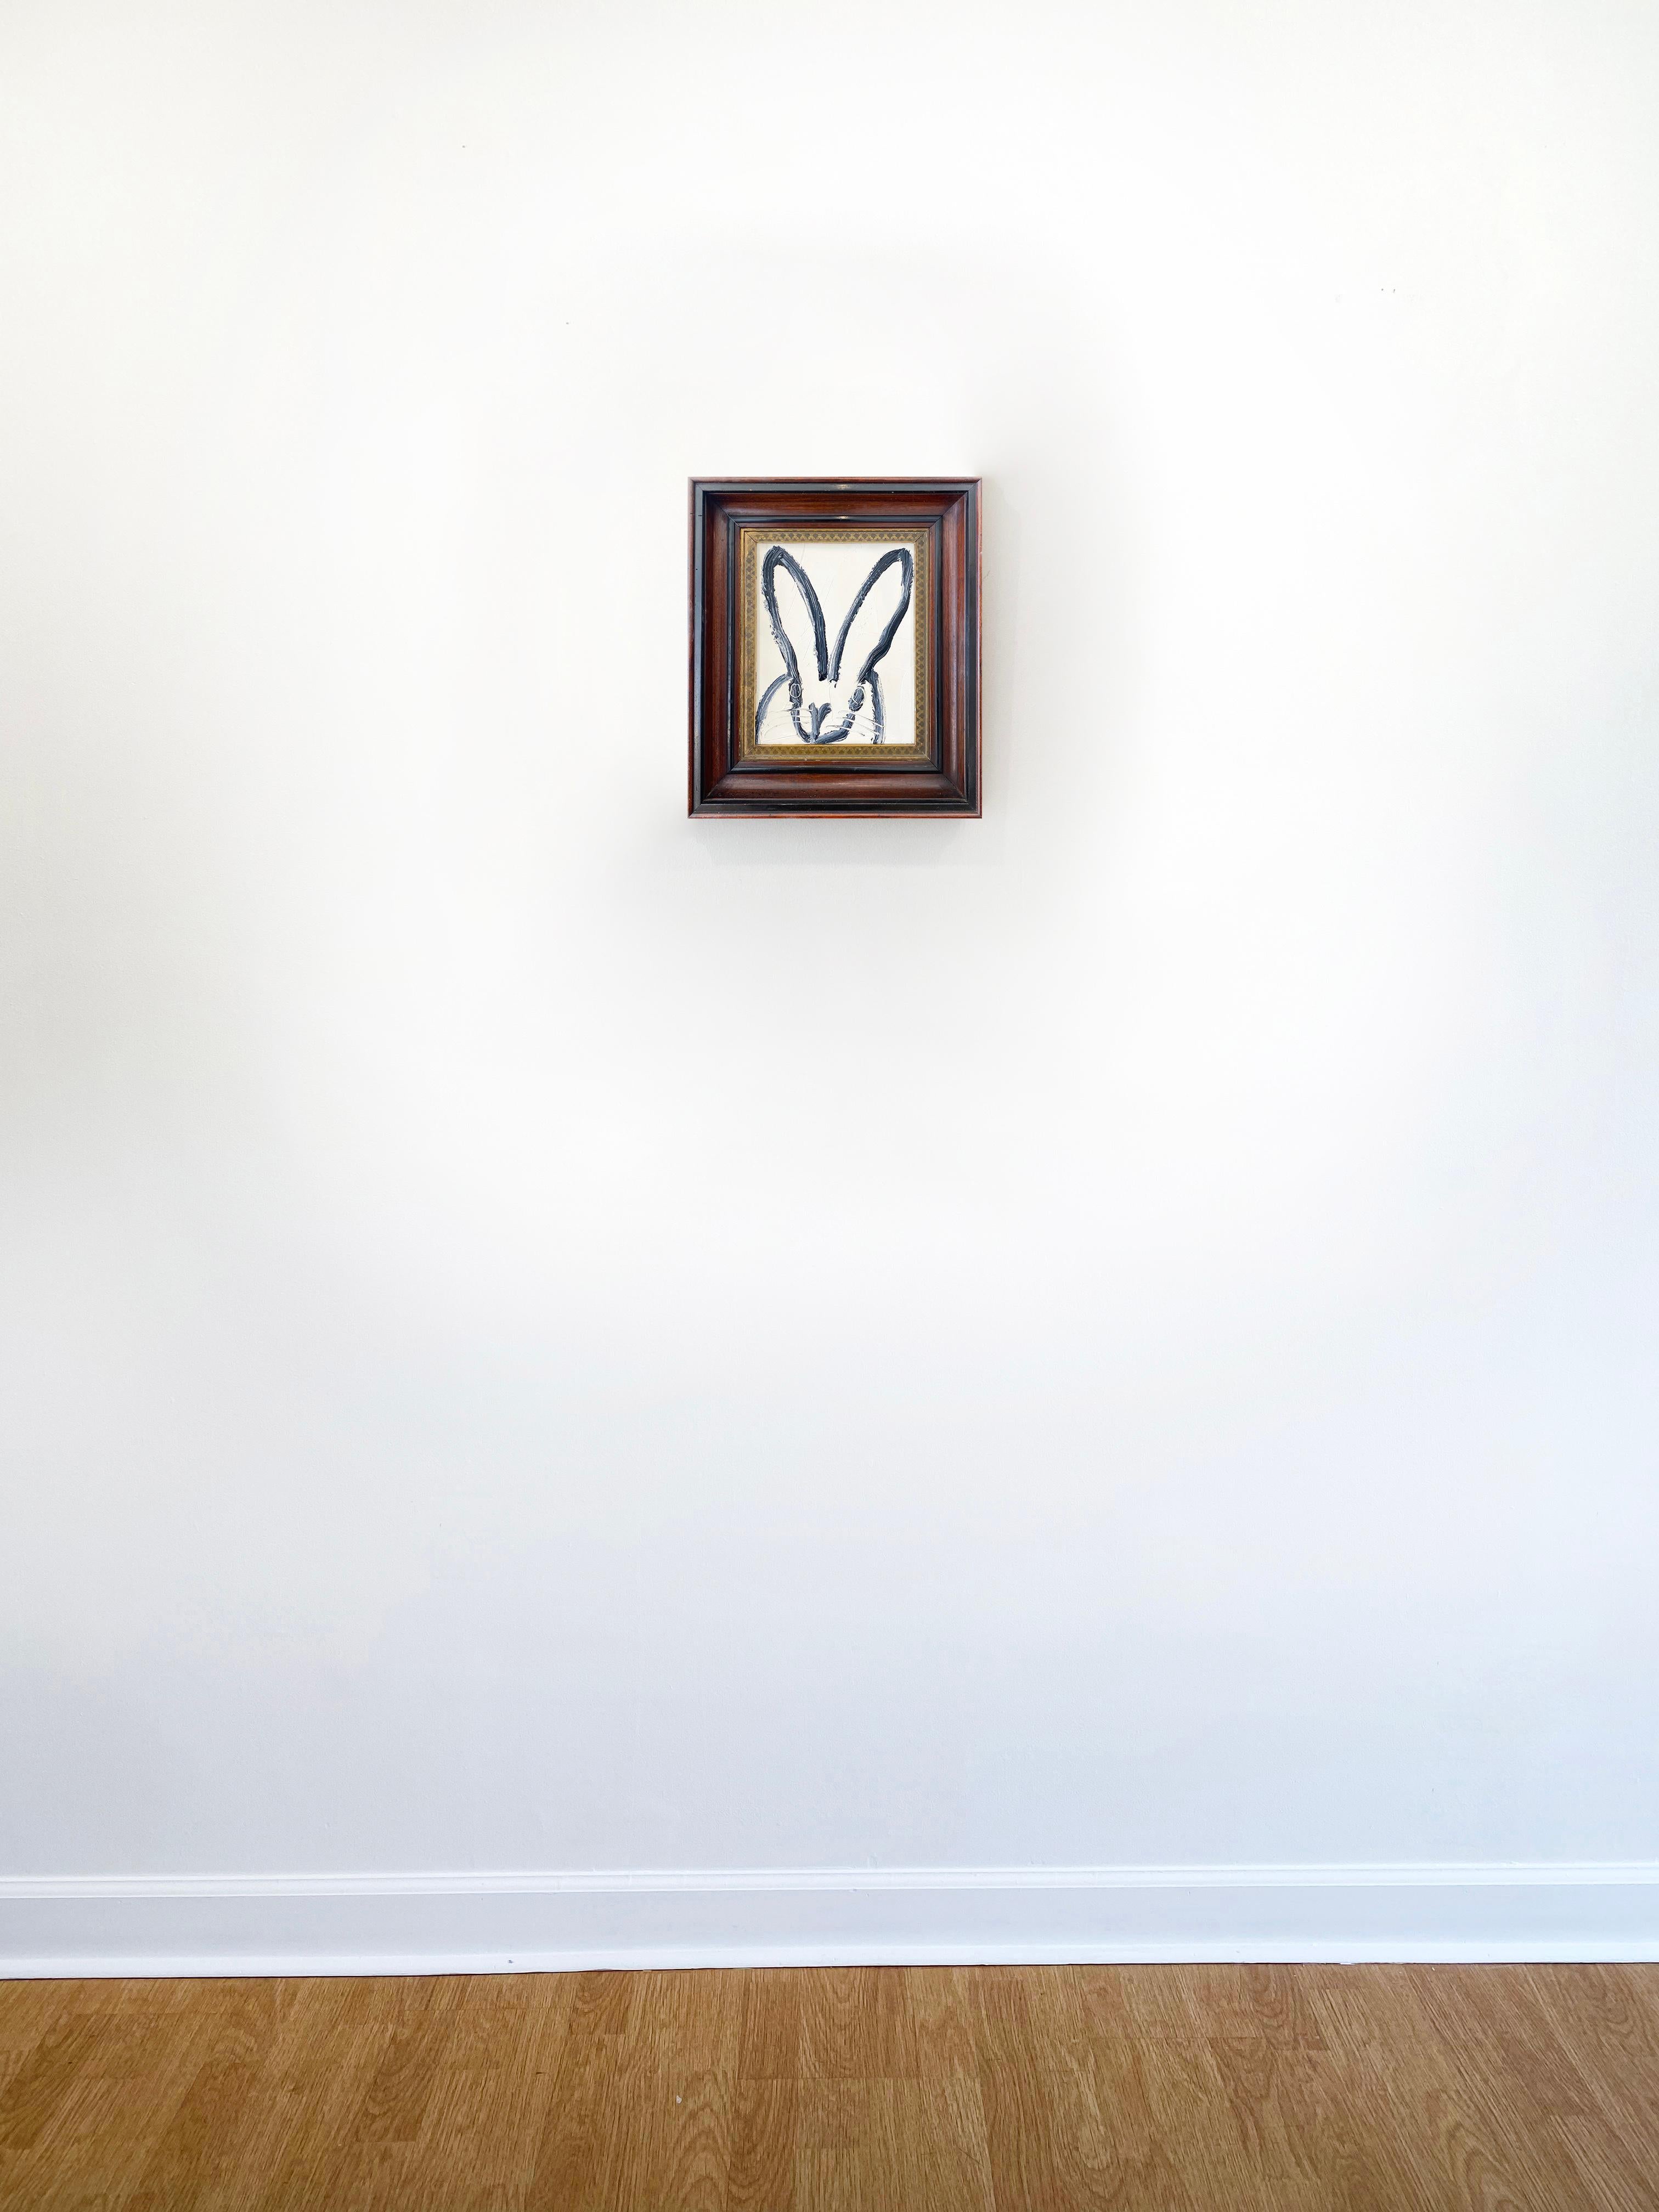 'Barbara' by Hunt Slonem, 2021. Oil on wood, 10 x 8 in. Framed size is 15 x 13 in. This painting features Slonem's signature bunny outlined in black on a bright white background.  This charming bunny features slender ears, and an expressive face. 